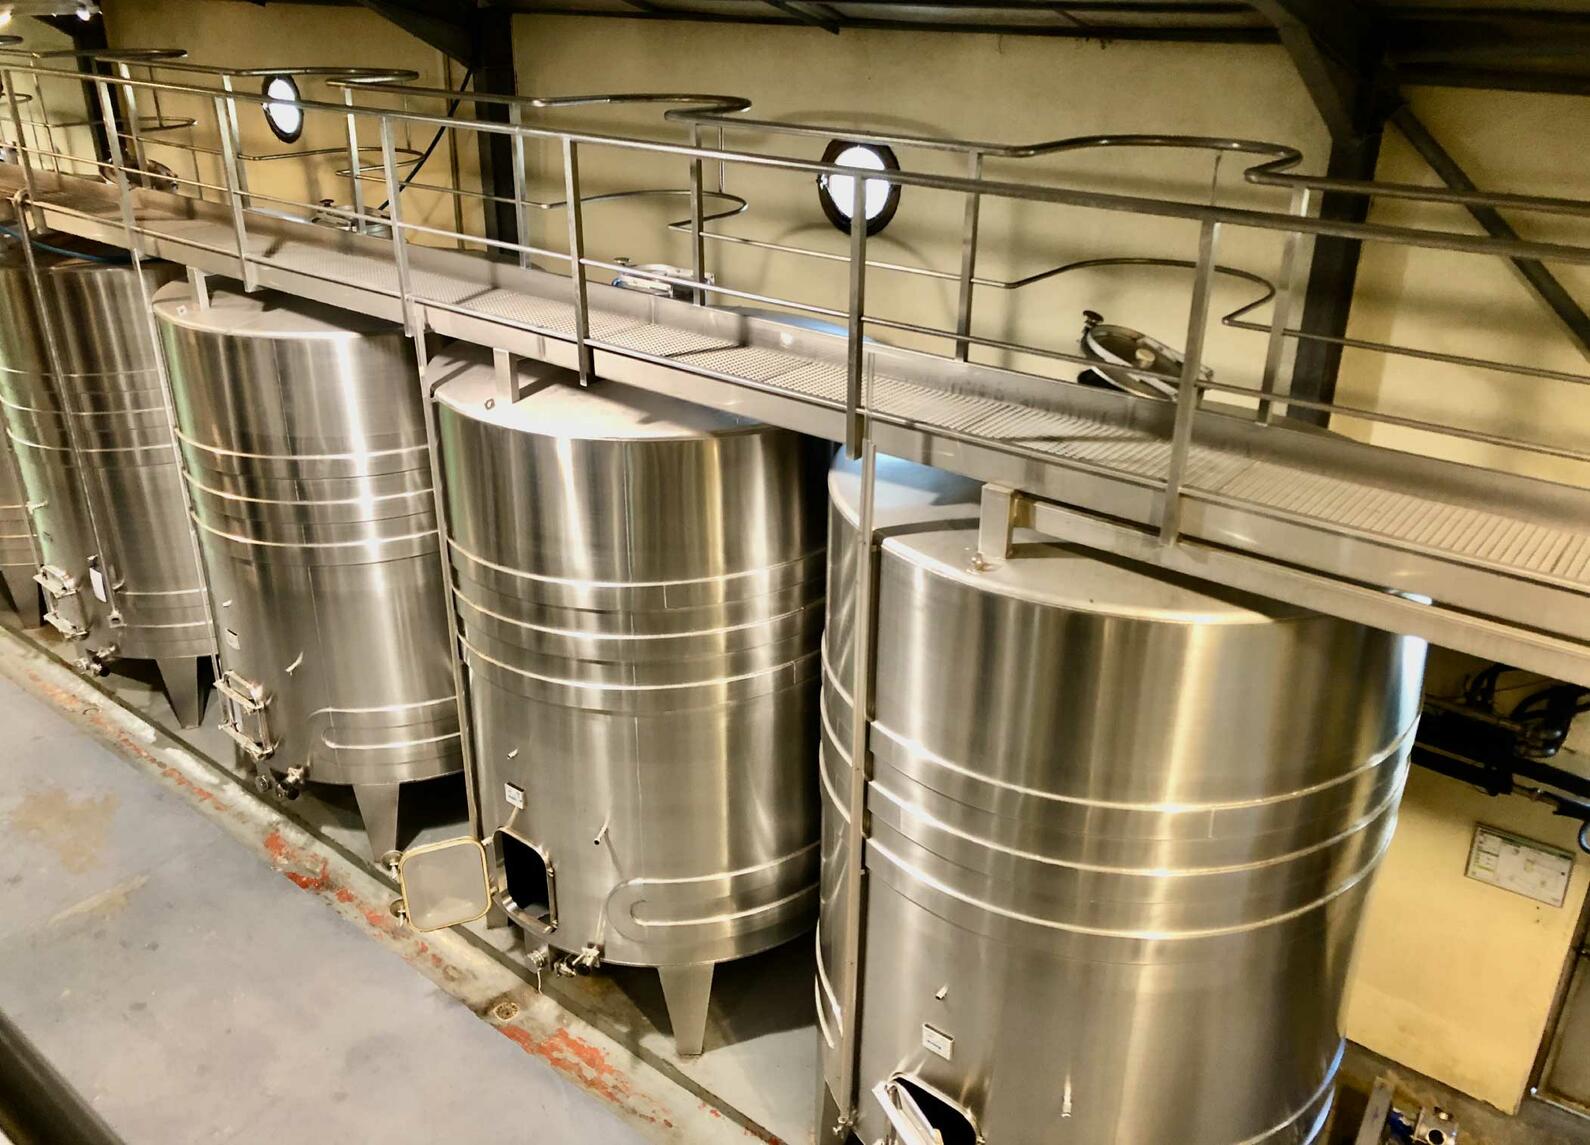 304L stainless steel tank - Cylindrical  - Vertical on legs